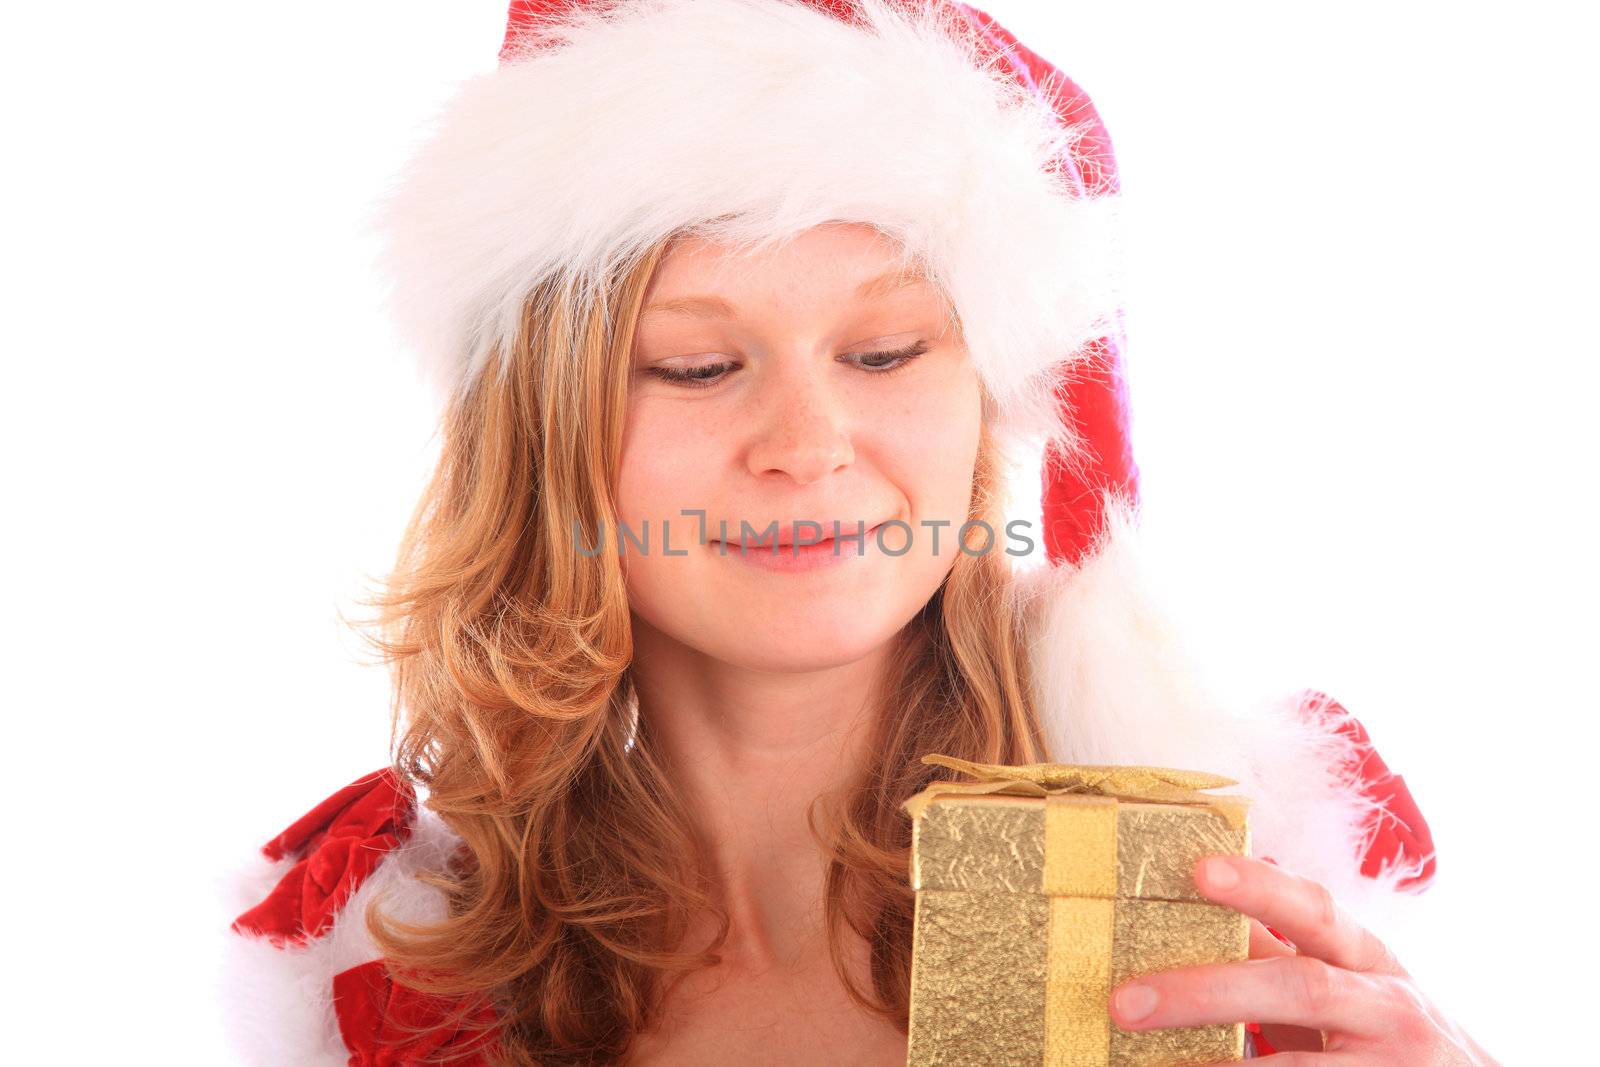 miss santa is smiling at a golden gift box in her hand